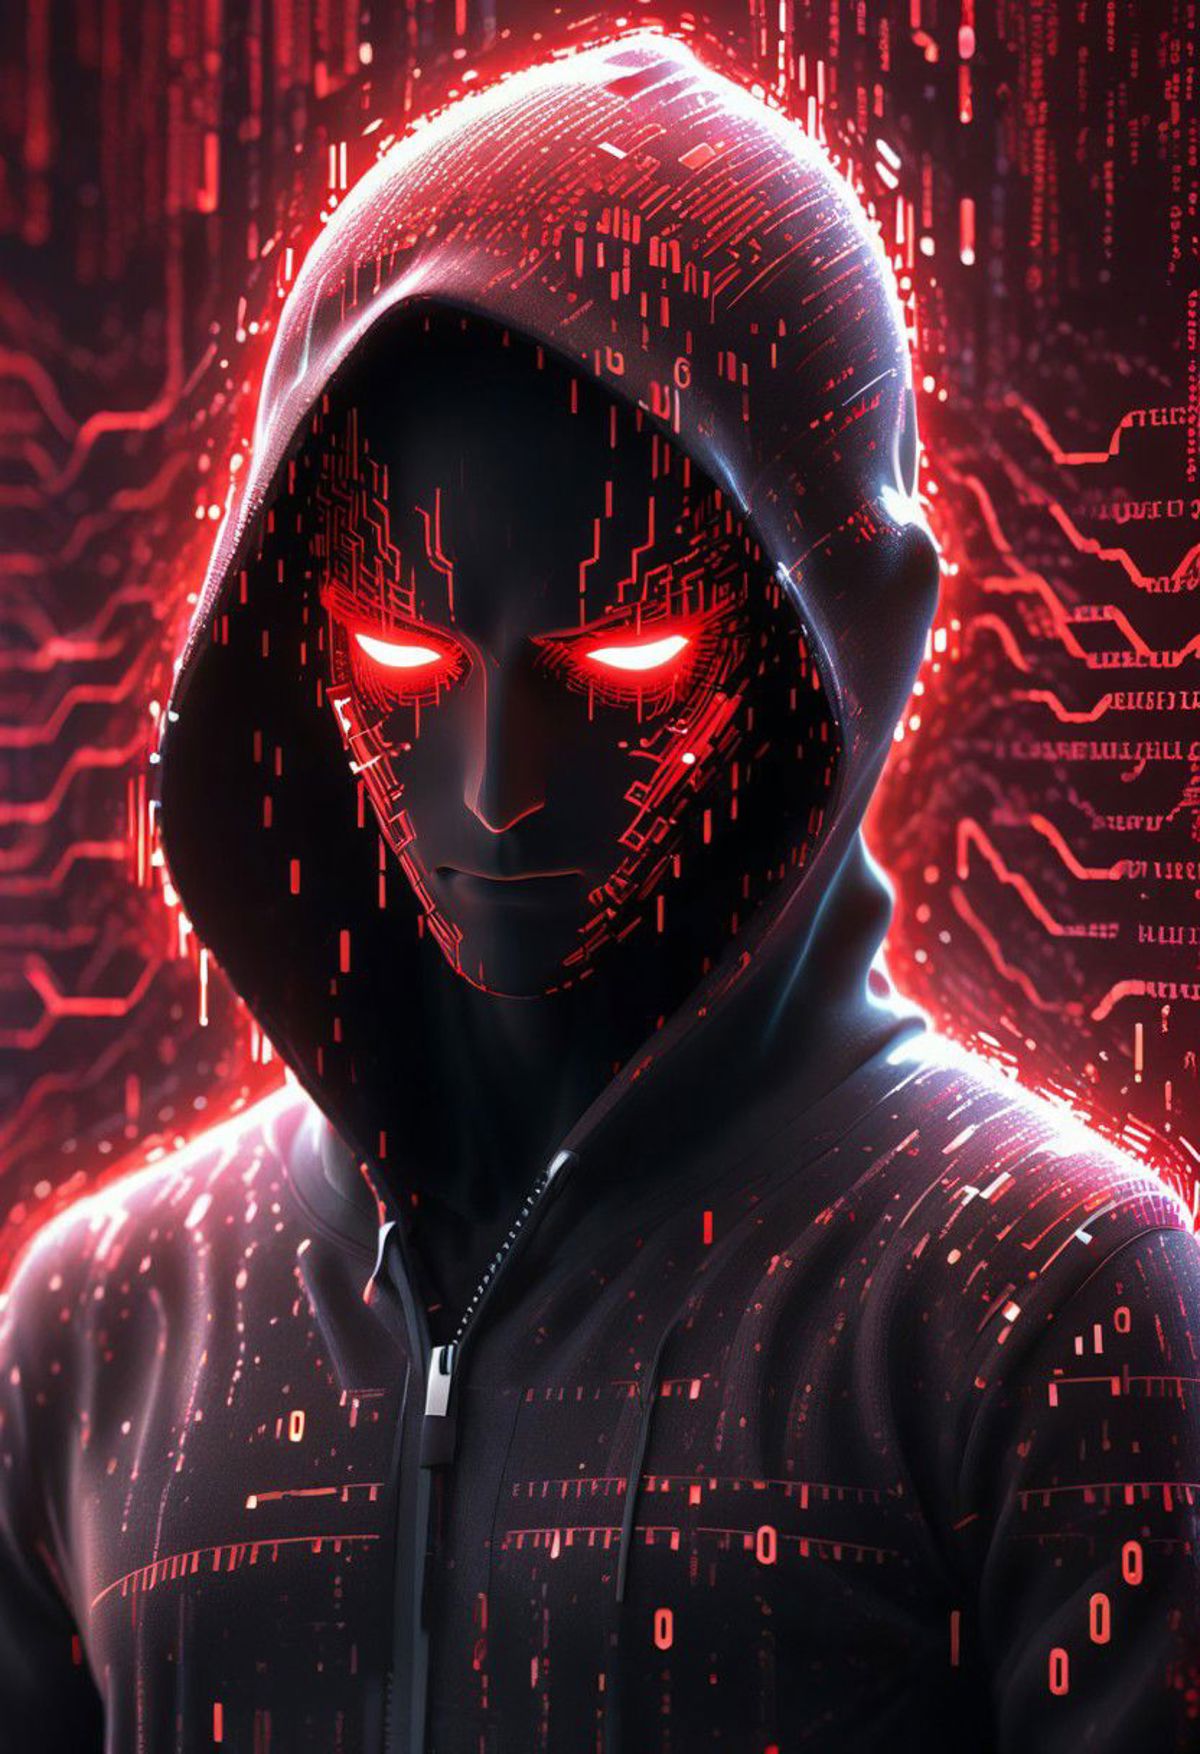 A person with a hood on and red eyes, wearing a black outfit with a digital pattern.